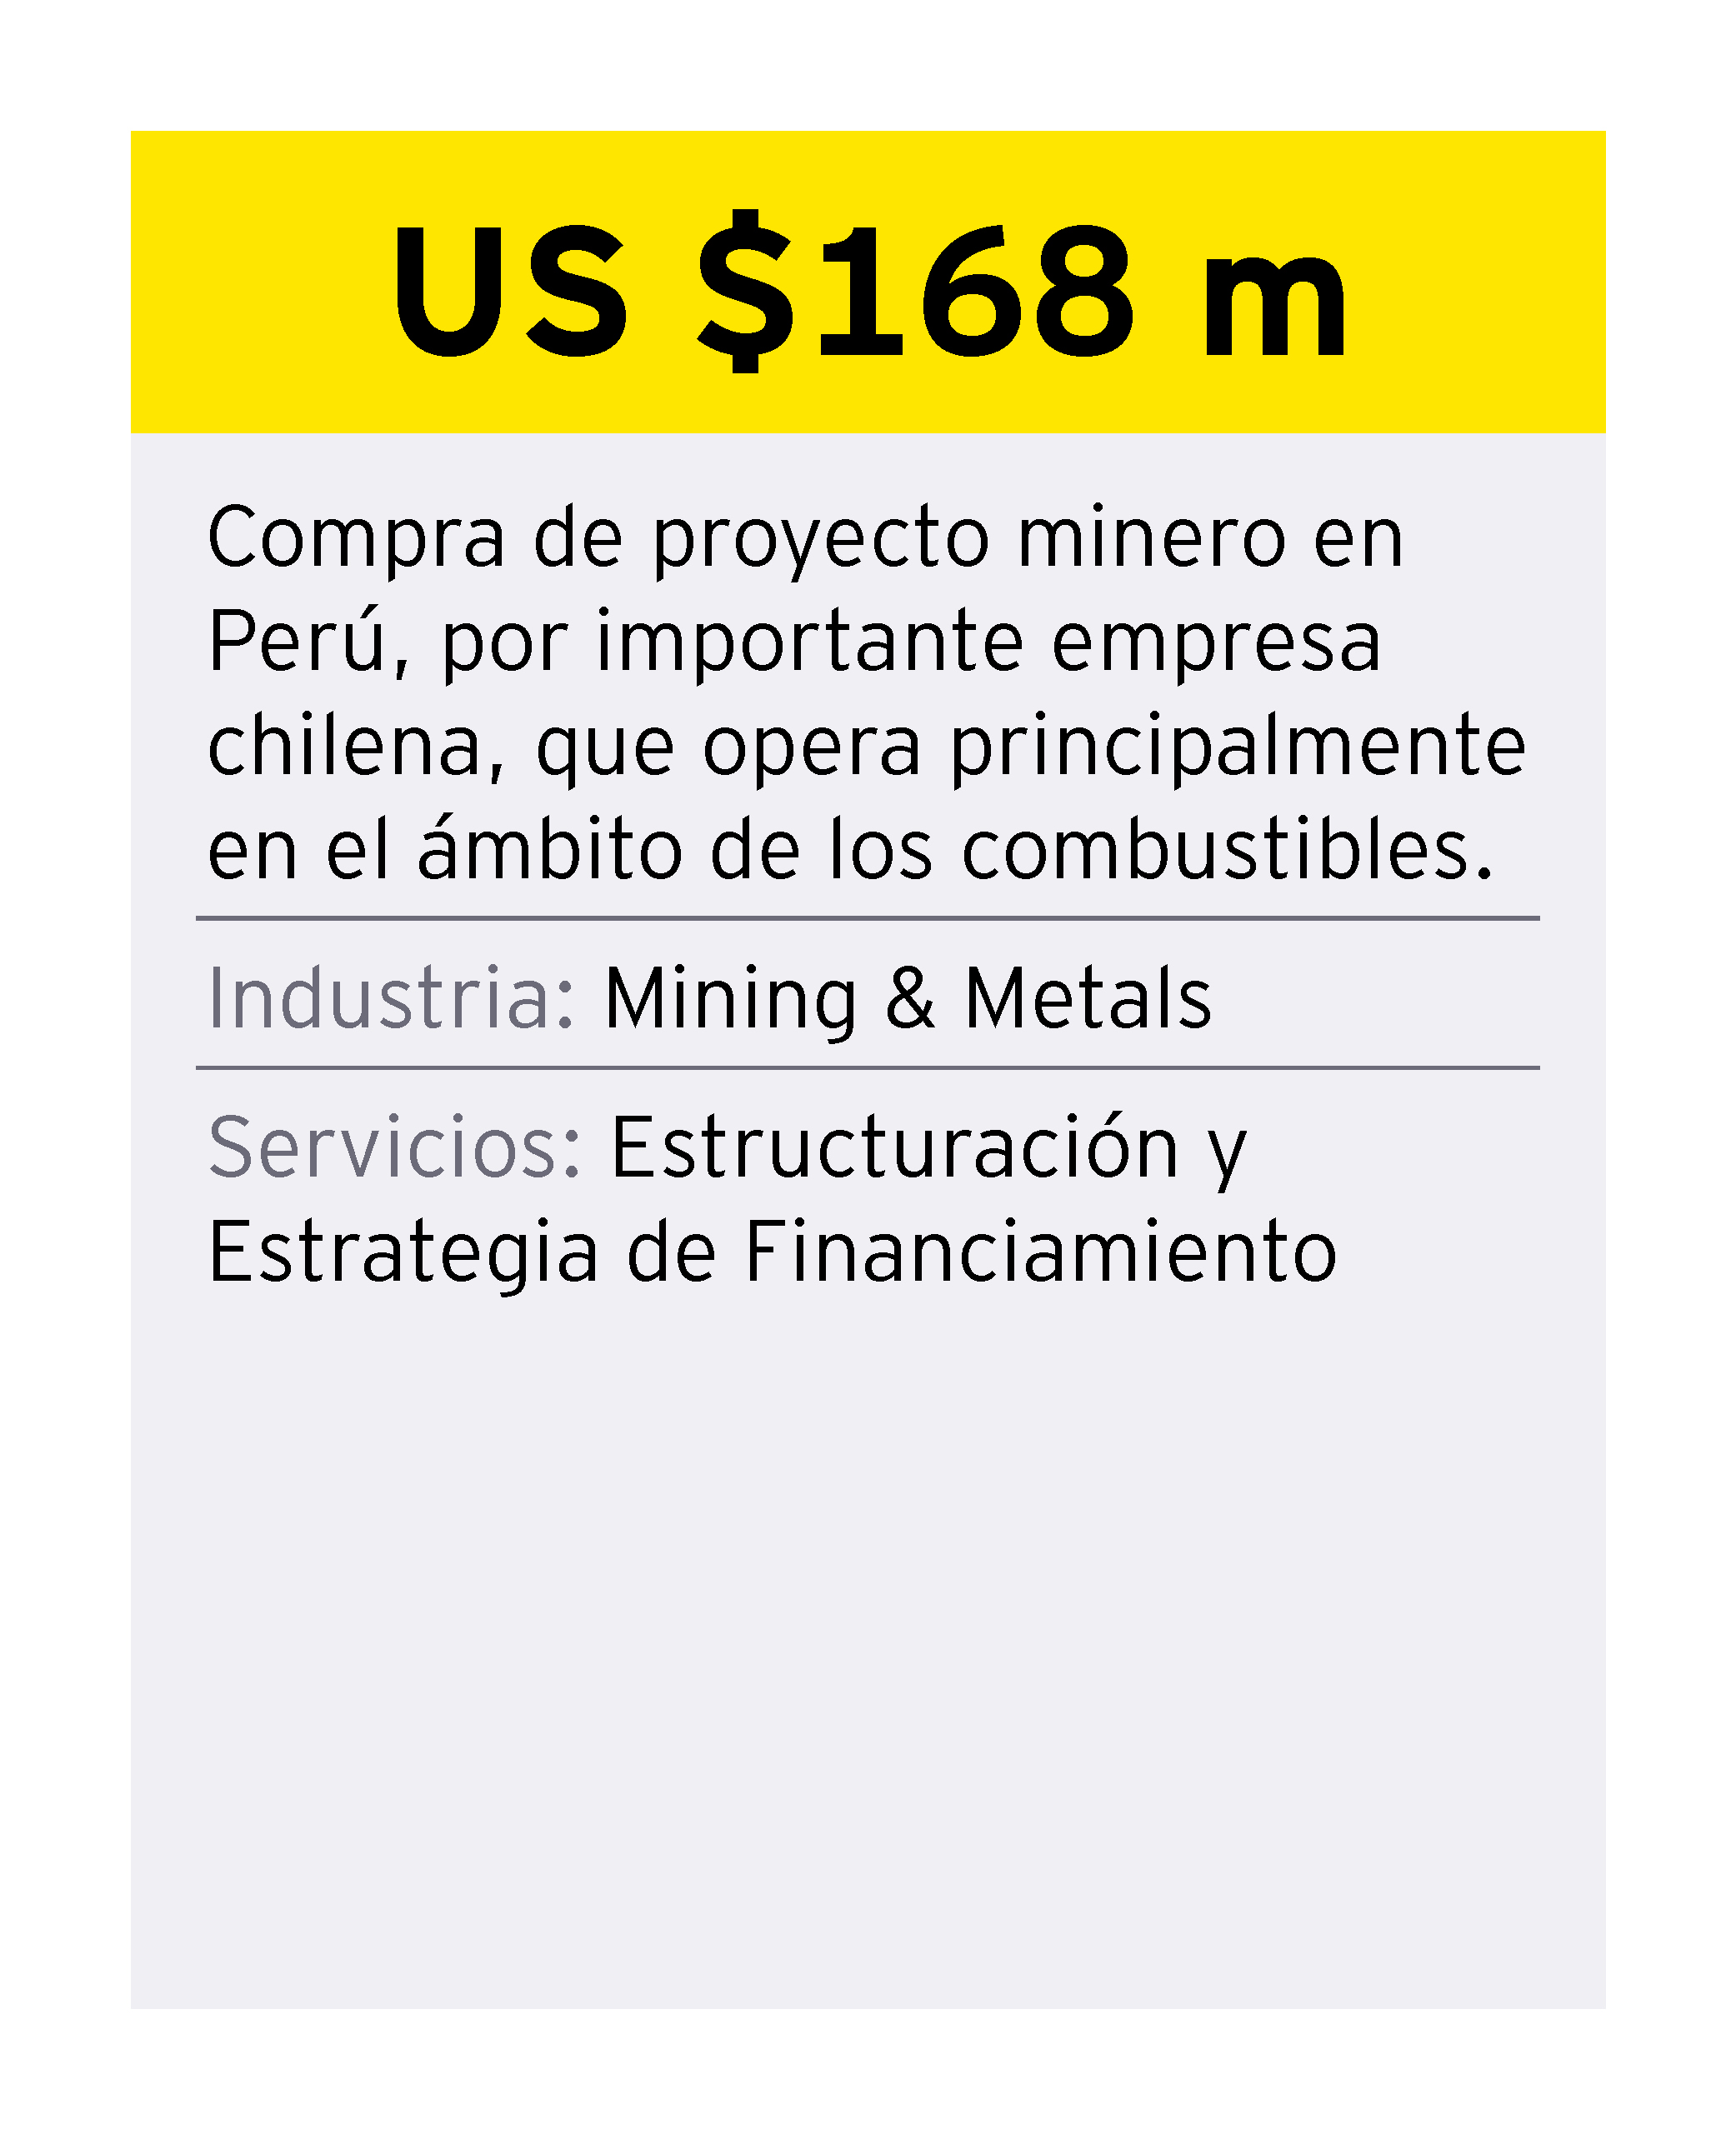 ey-chile-credencial-2-mining-and-metals